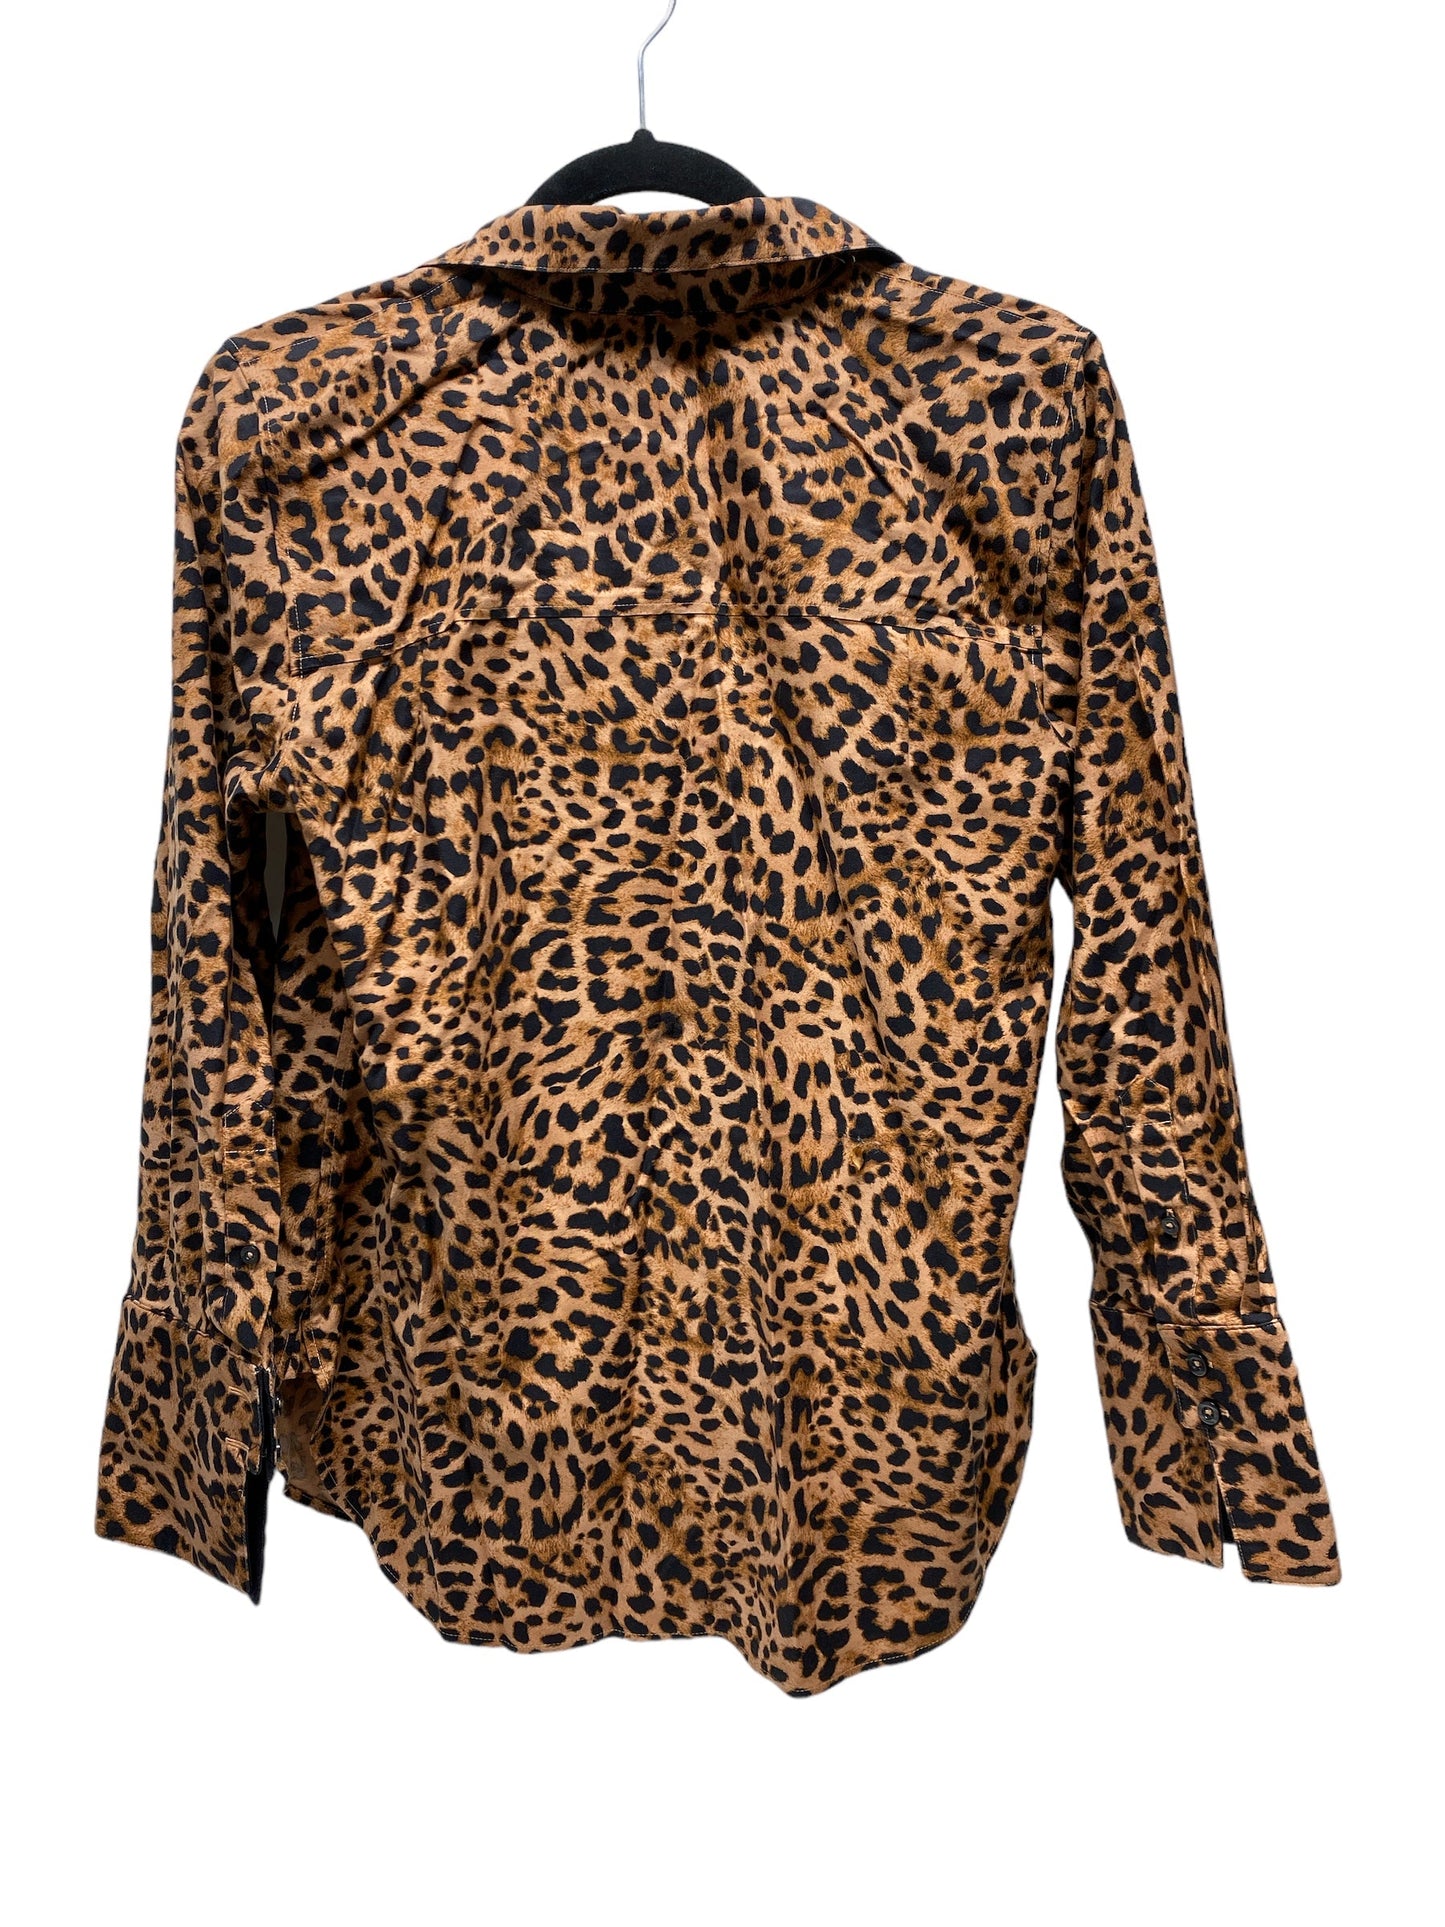 Animal Print Top Long Sleeve Chicos, Size S